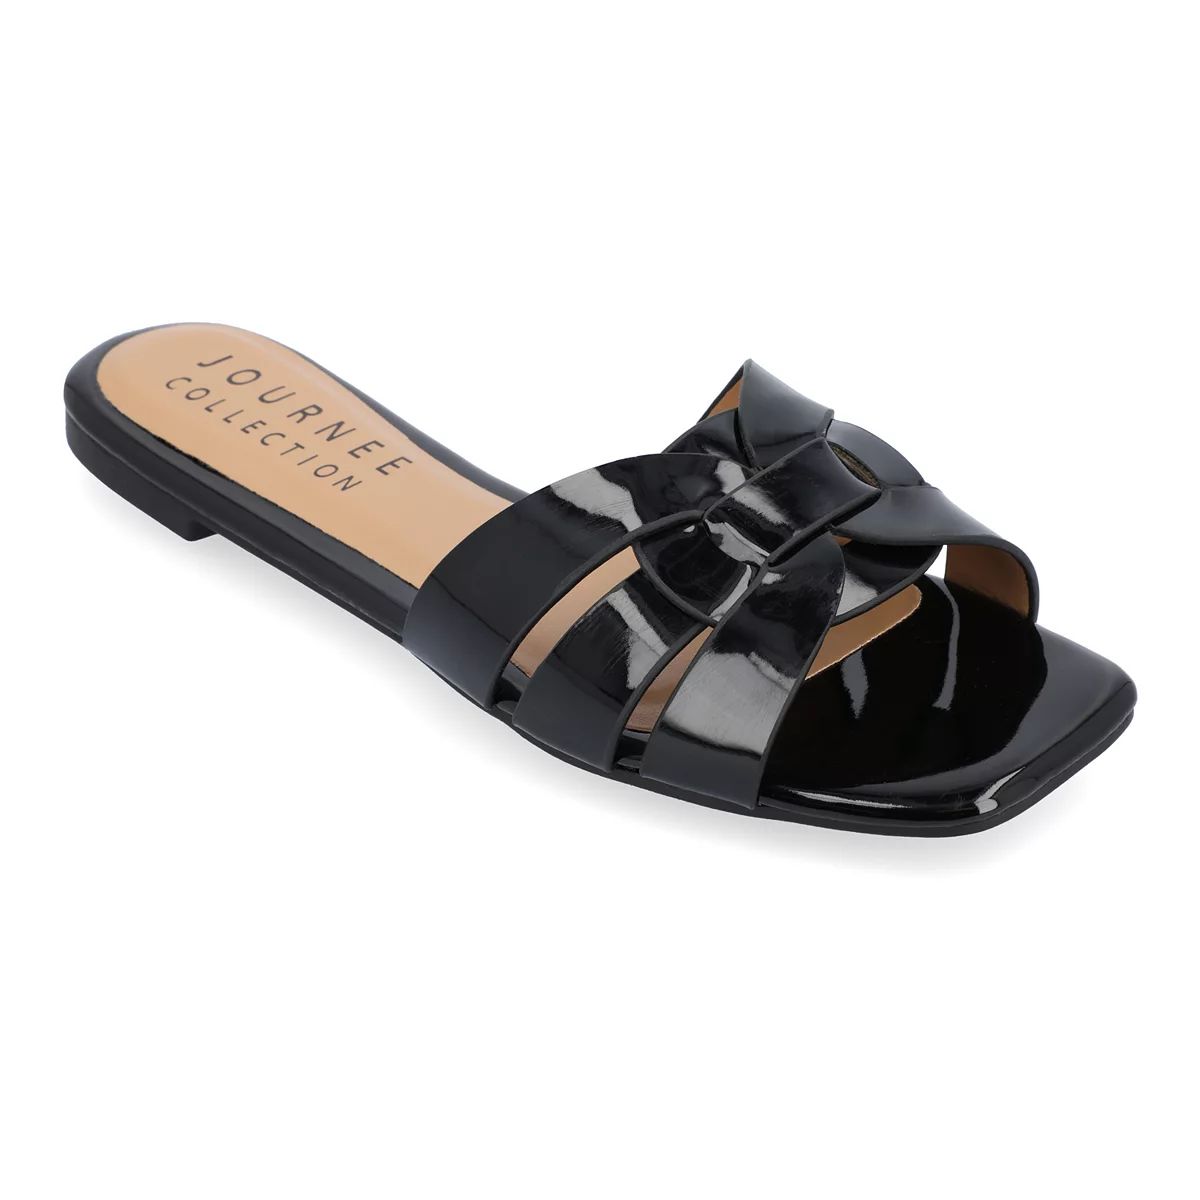 Journee Collection Arrina Women's Square Toe Sandals | Kohl's